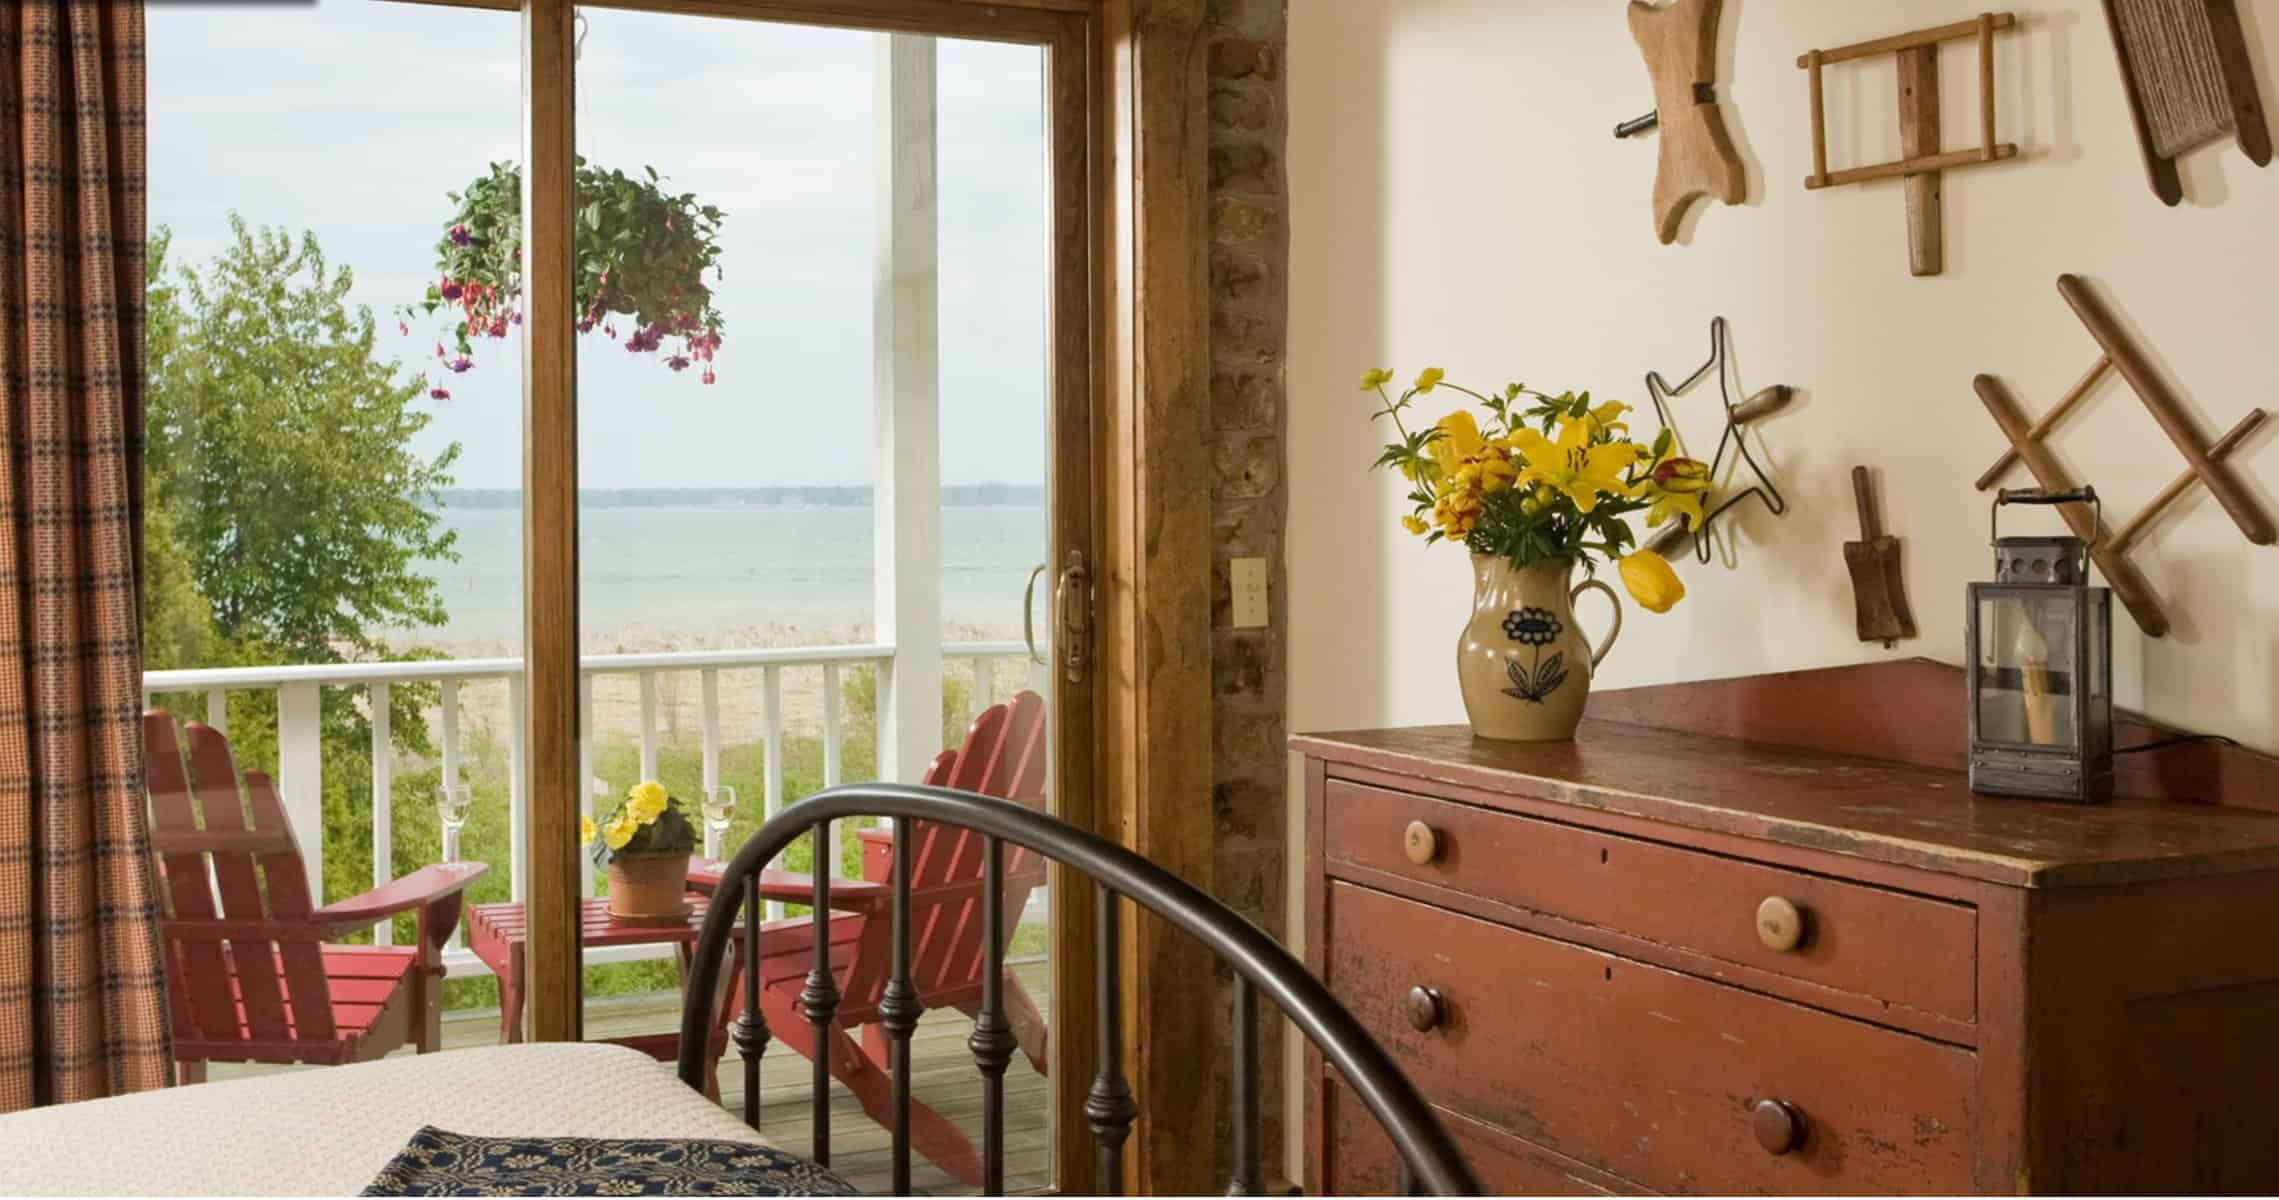 blacksmith inn door county, view of a room with lake michigan in the background